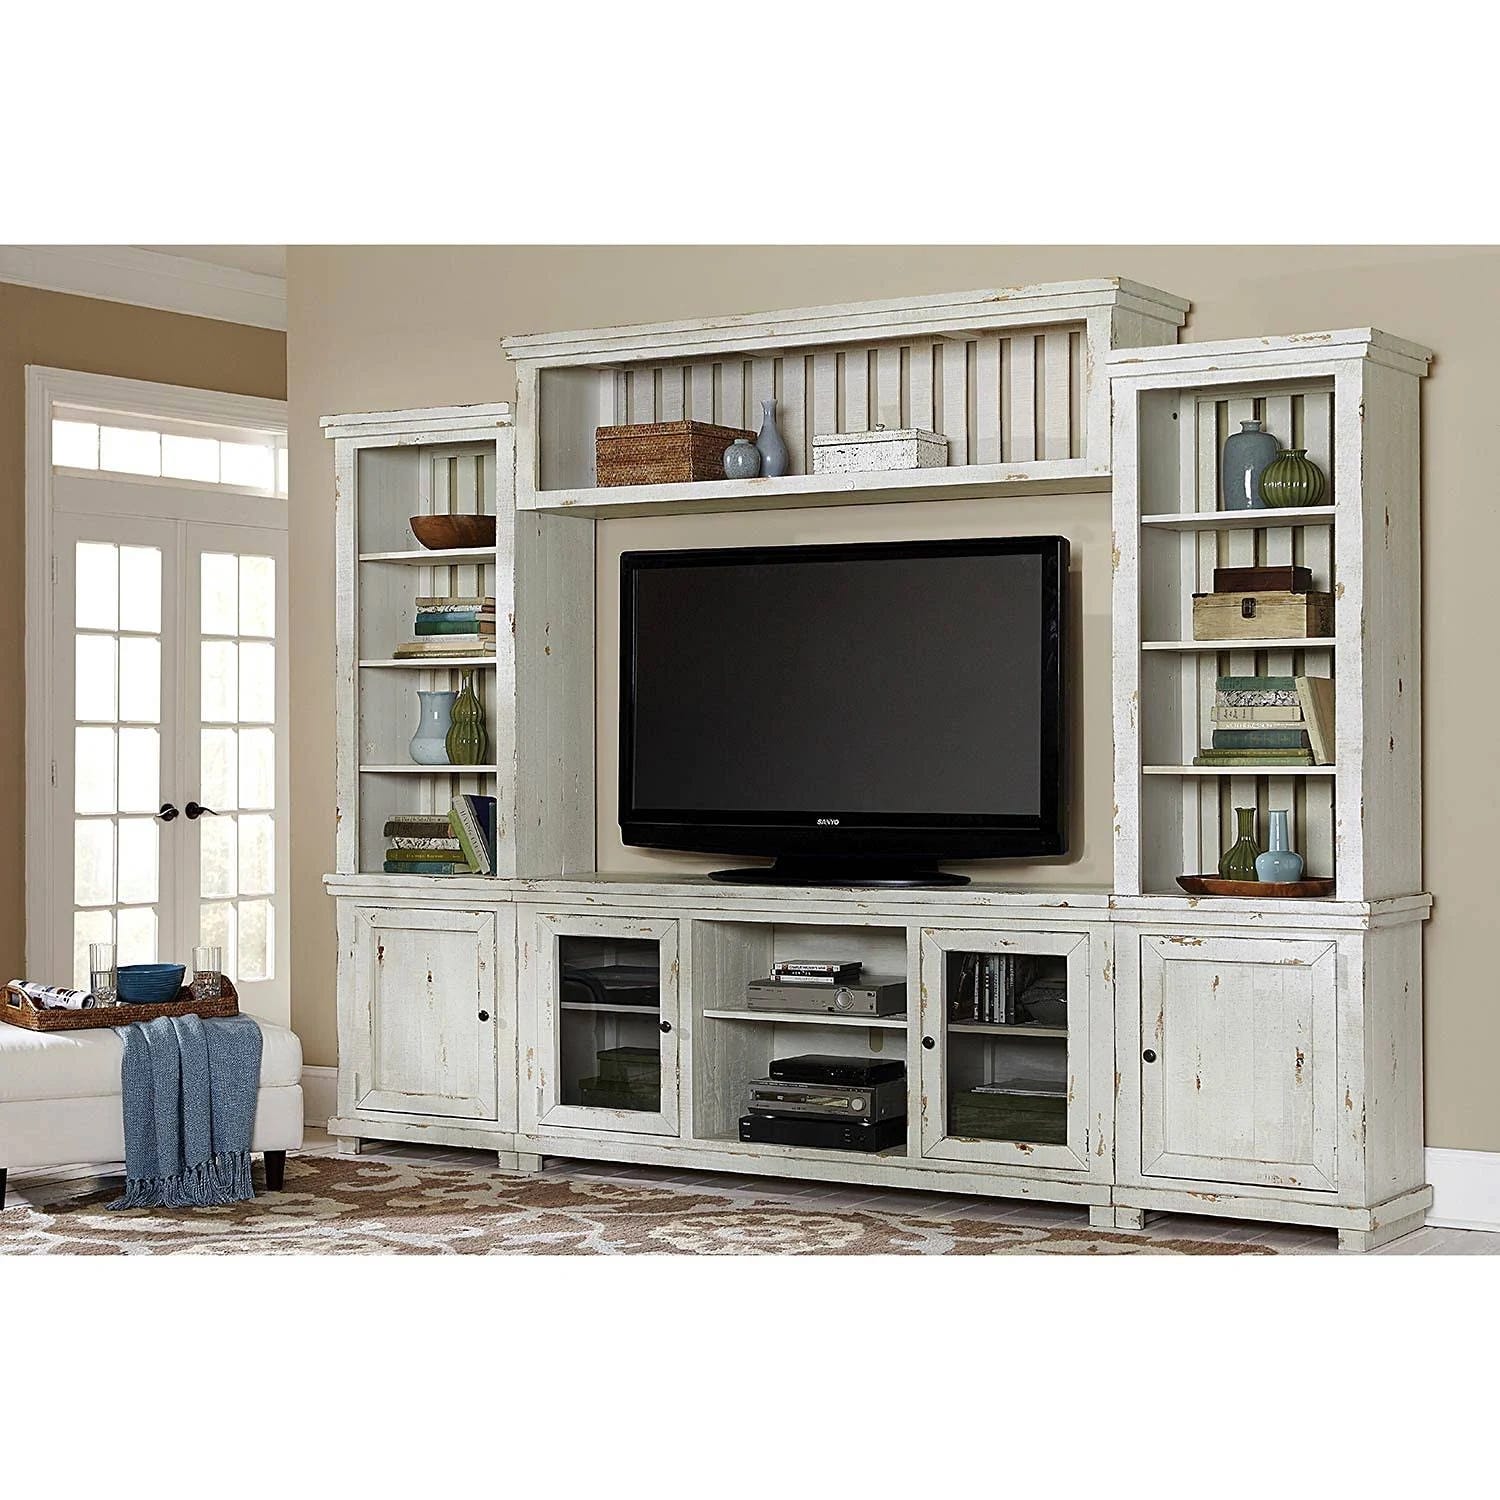 Distressed White Willow TV Stand by Progressive Furniture | Image